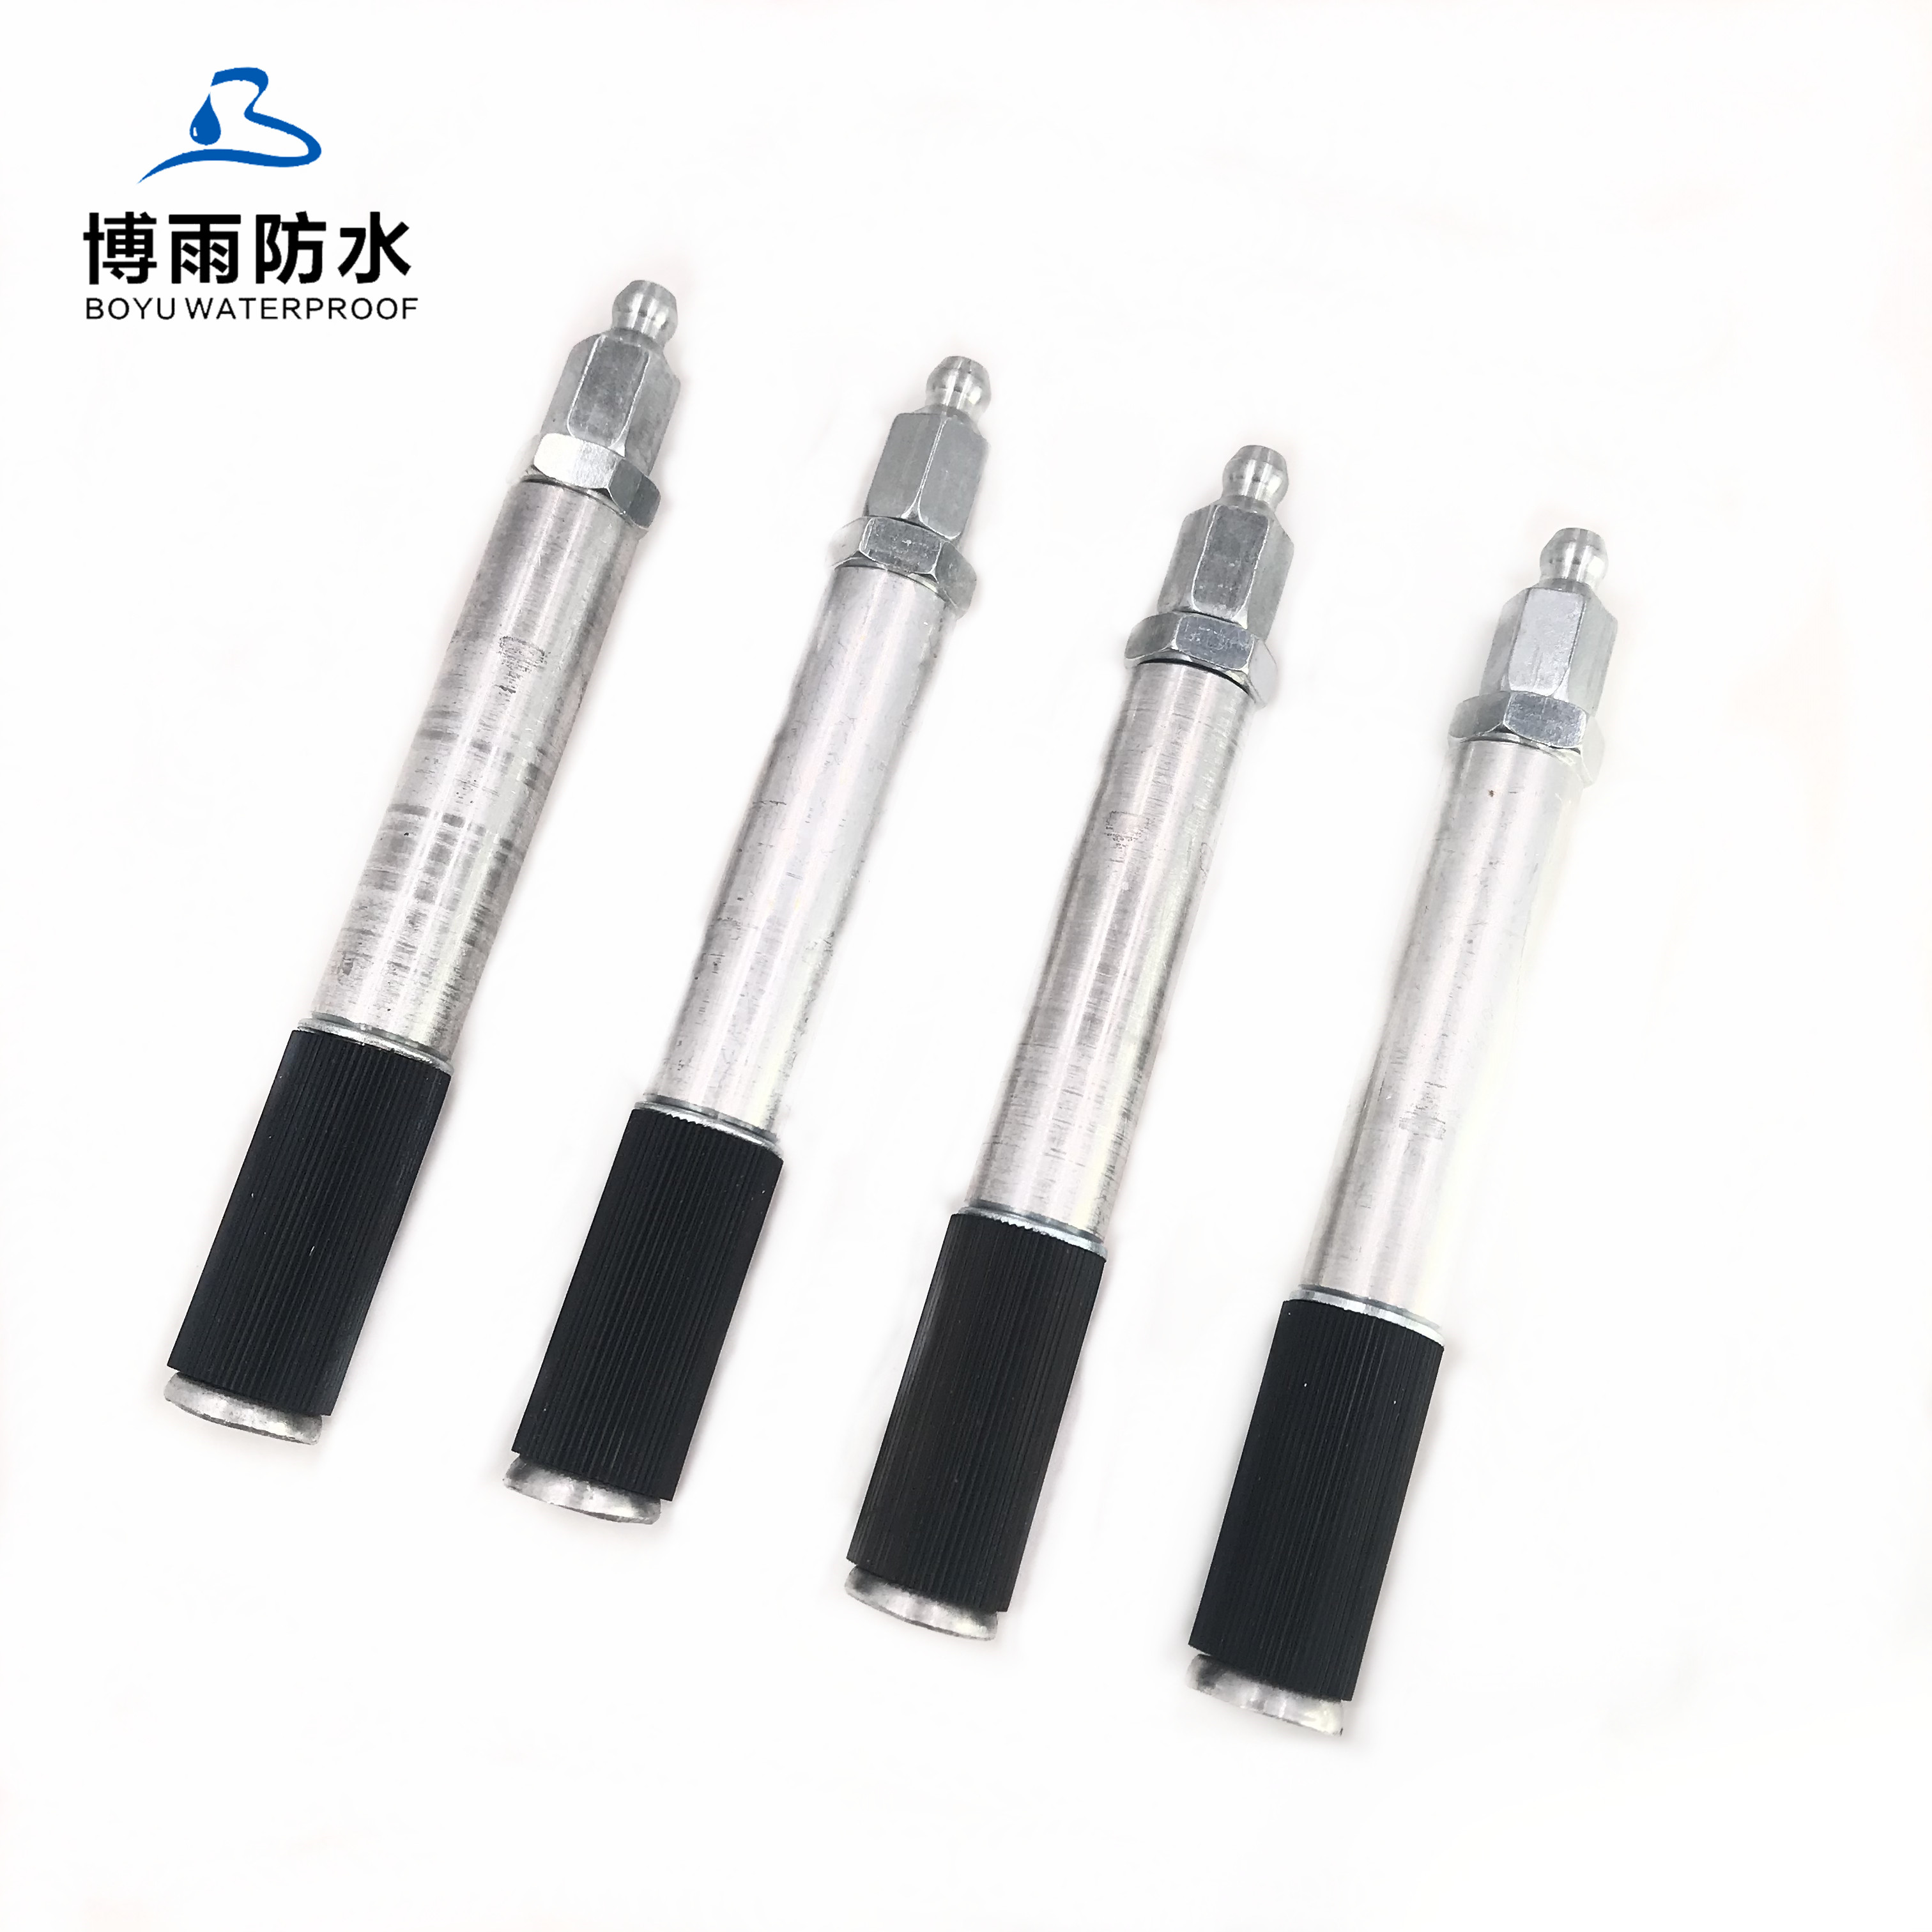 injection grouting packers steel Aluminum 13*100mm A10 Grout Injection Packer